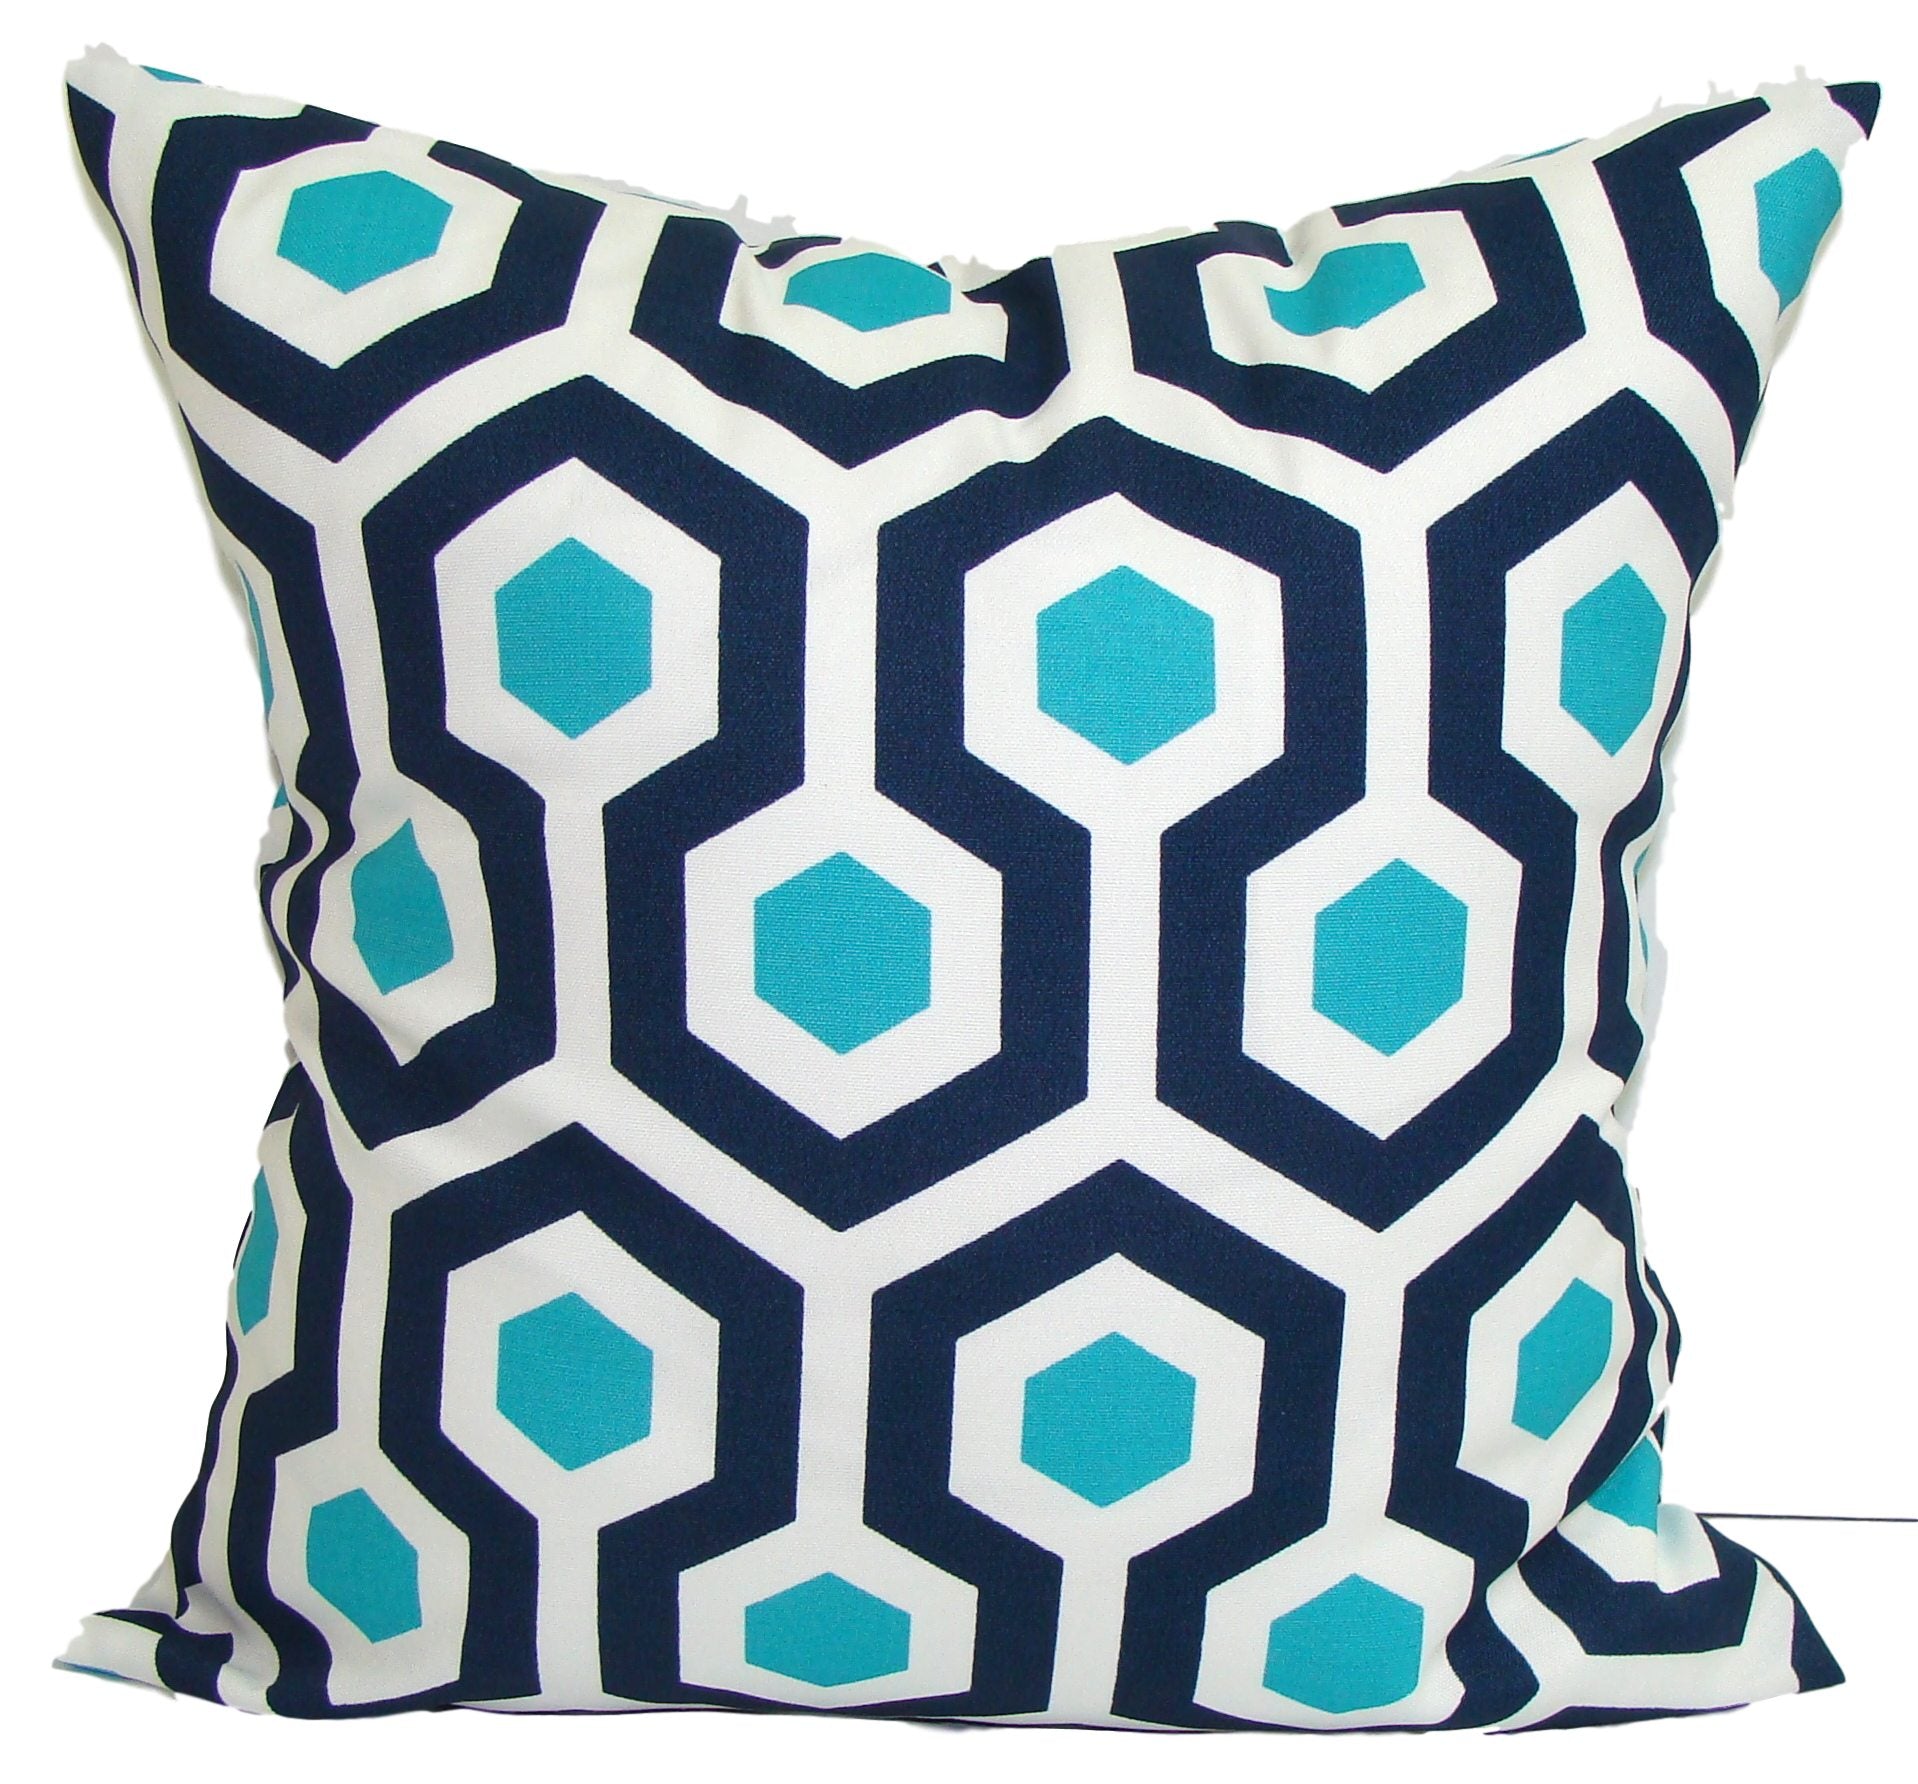 Custom Designer Throw Pillows For Indoor or Outdoor Use